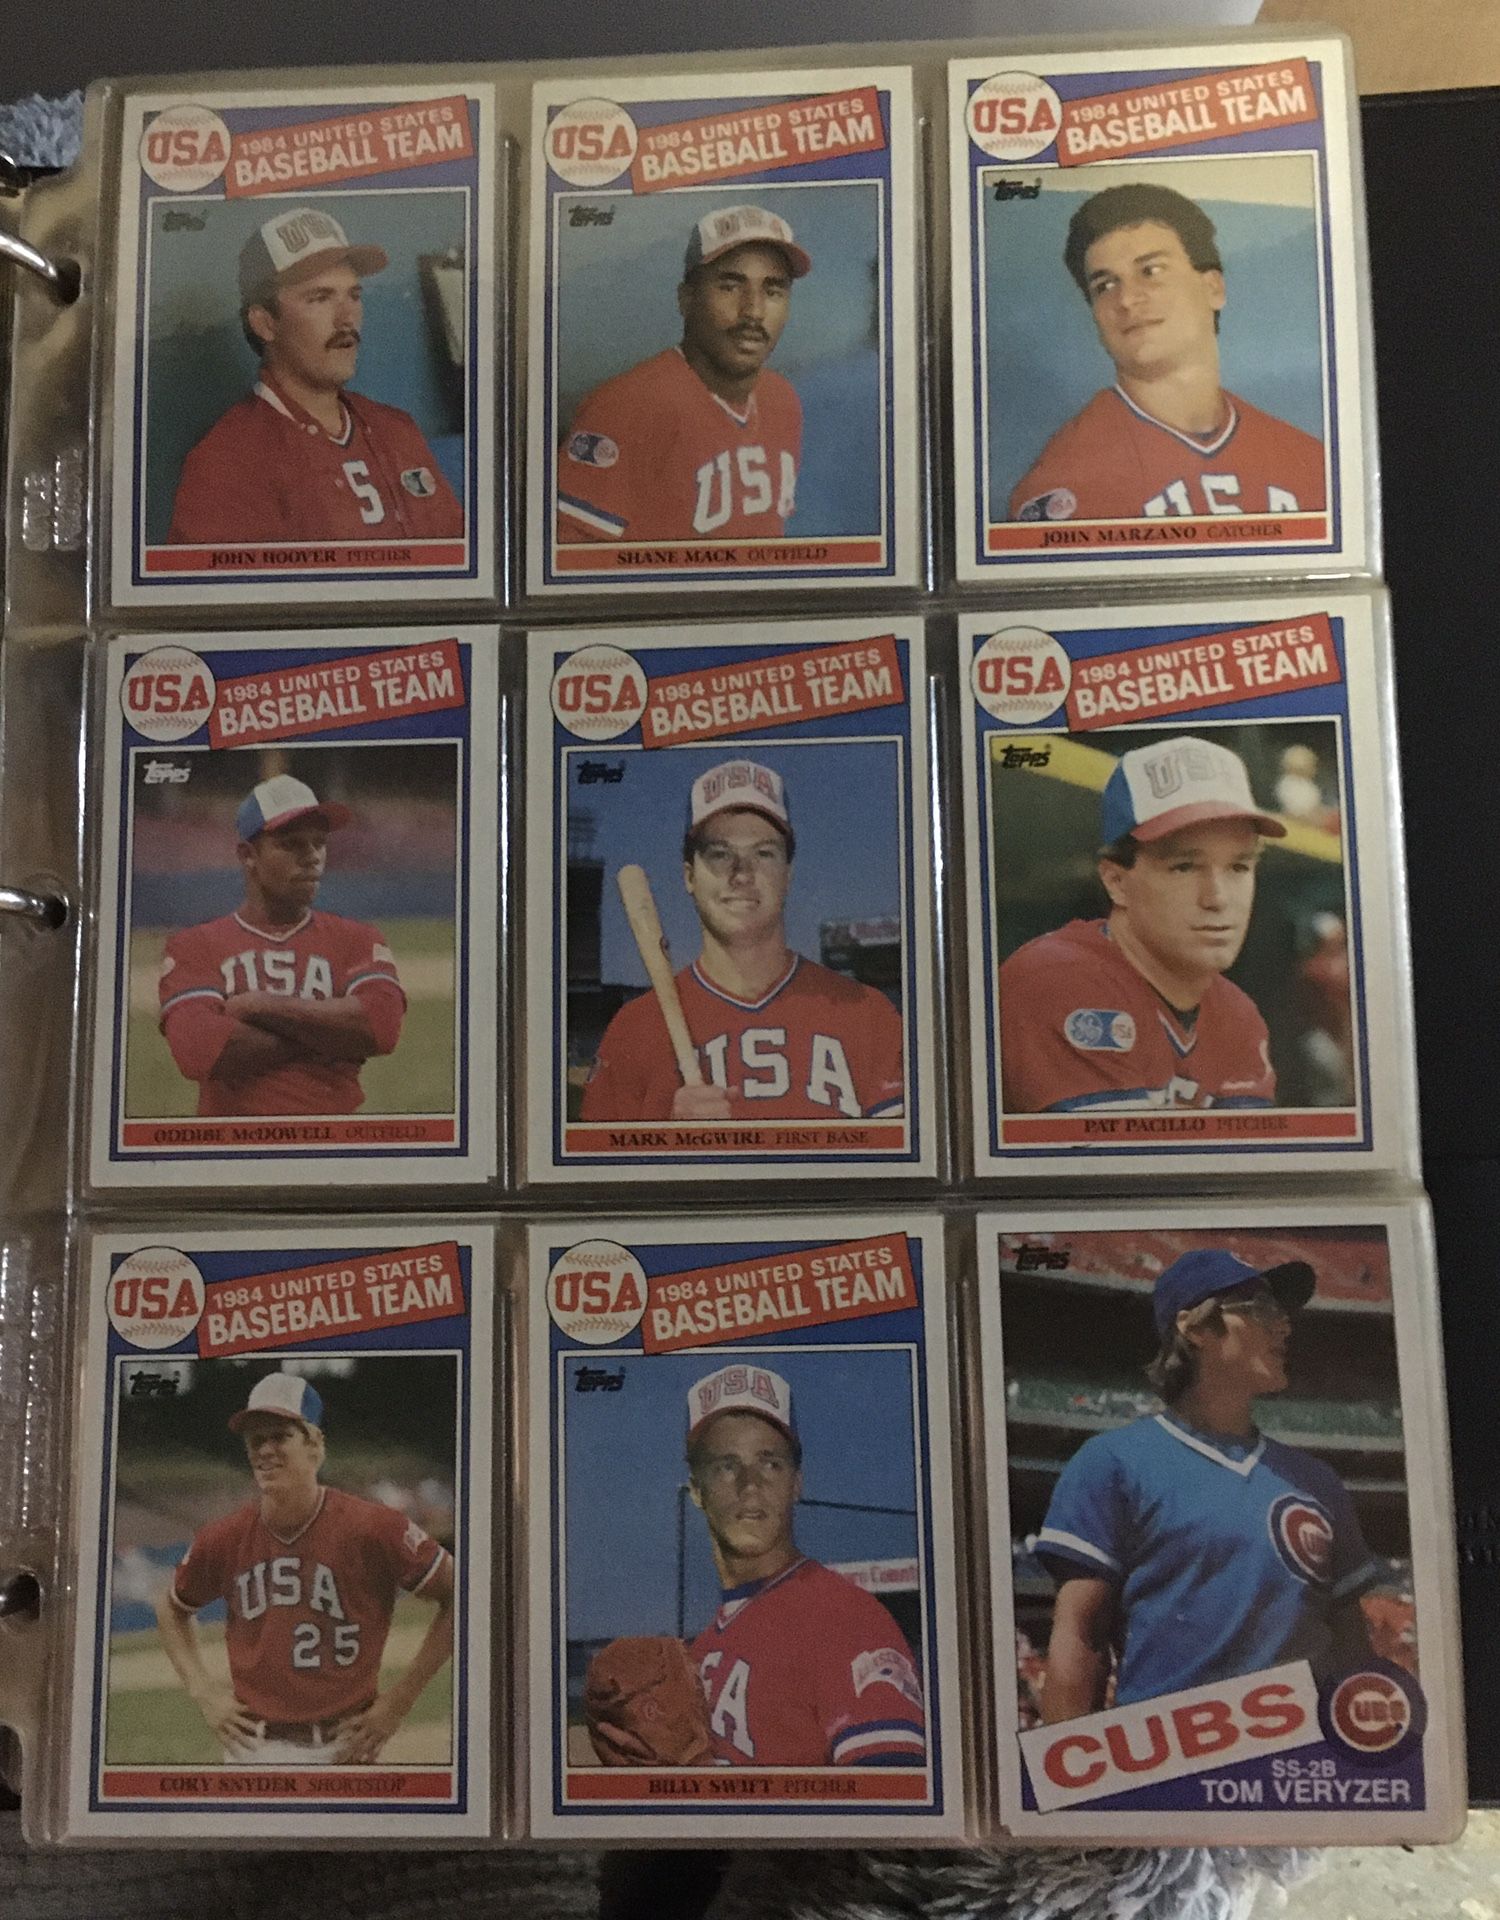 1985 Topps Baseball Complete 792 Card Set with Kirby Puckett, Roger Clemens and Mark McGwire Rookie Cards Plus Other Stars Including Ryan, Brett, Mat